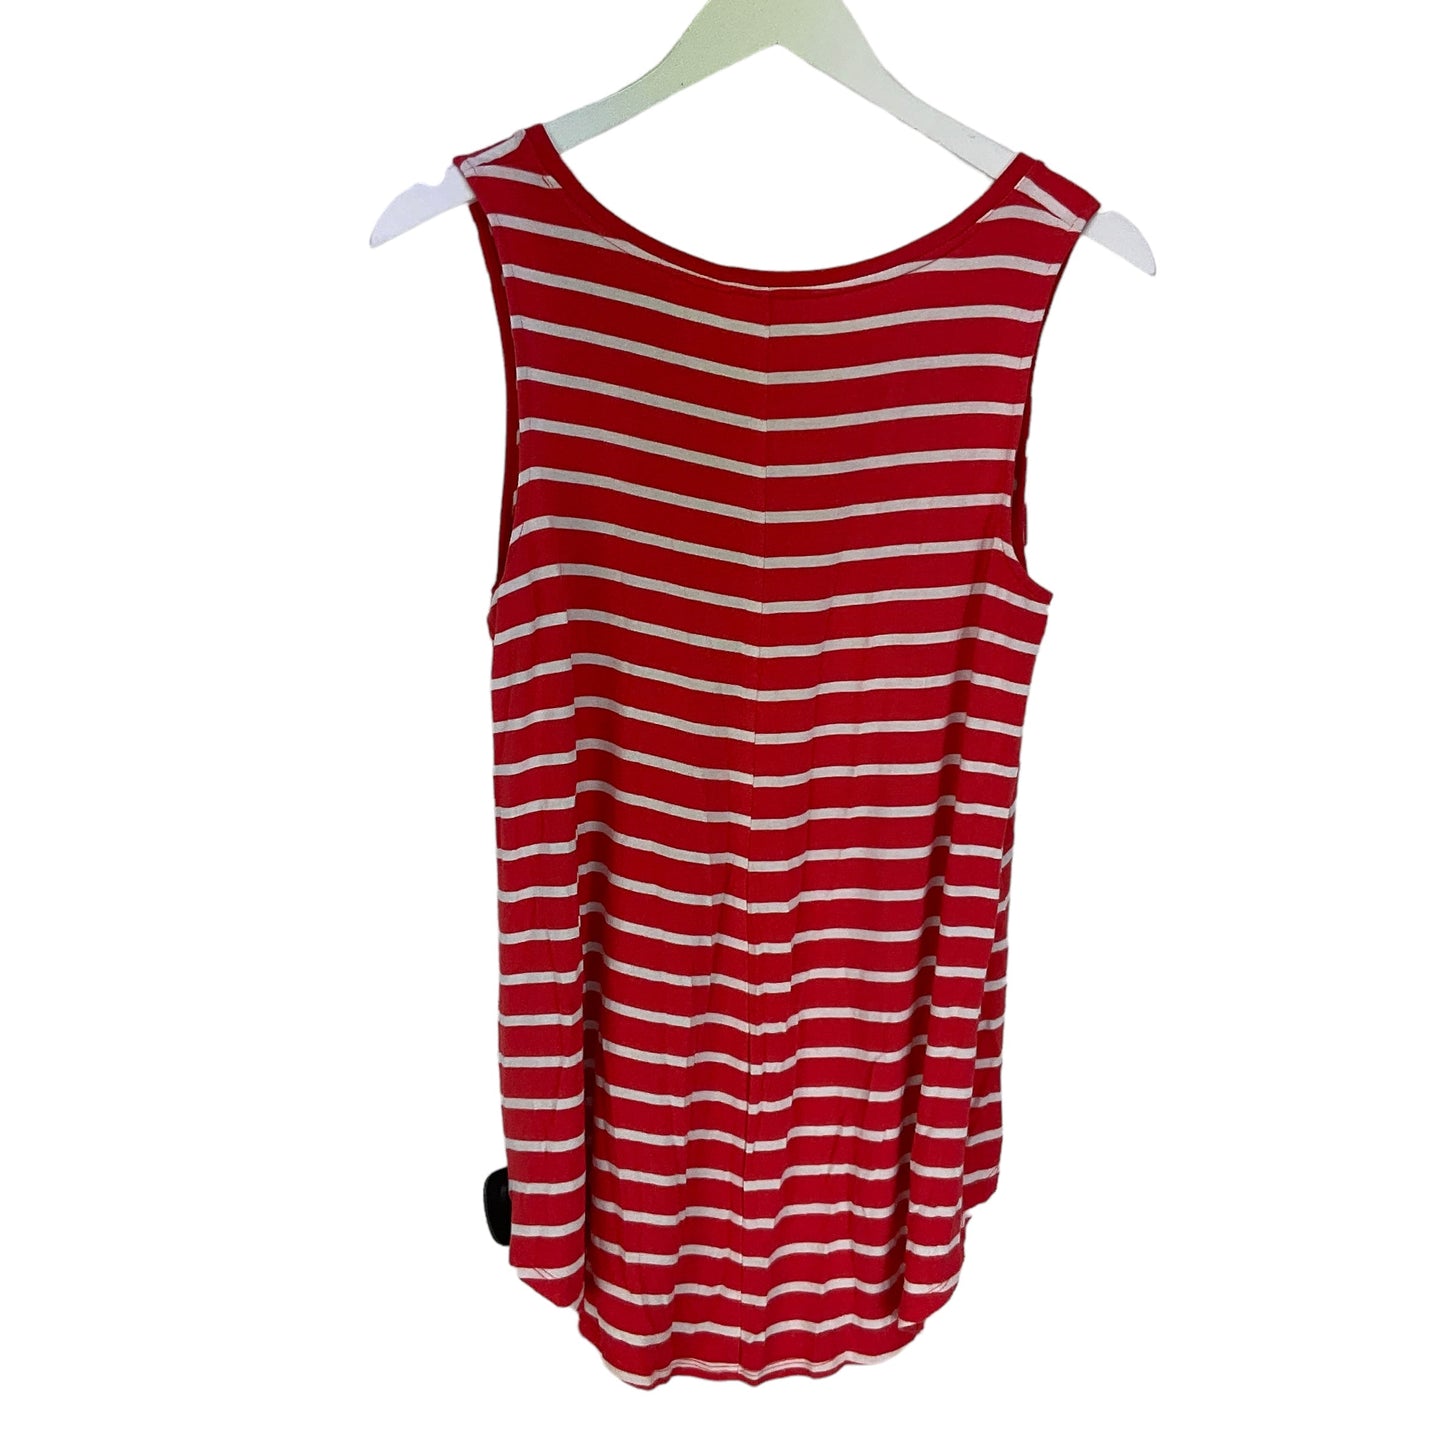 Top Sleeveless By Old Navy  Size: M